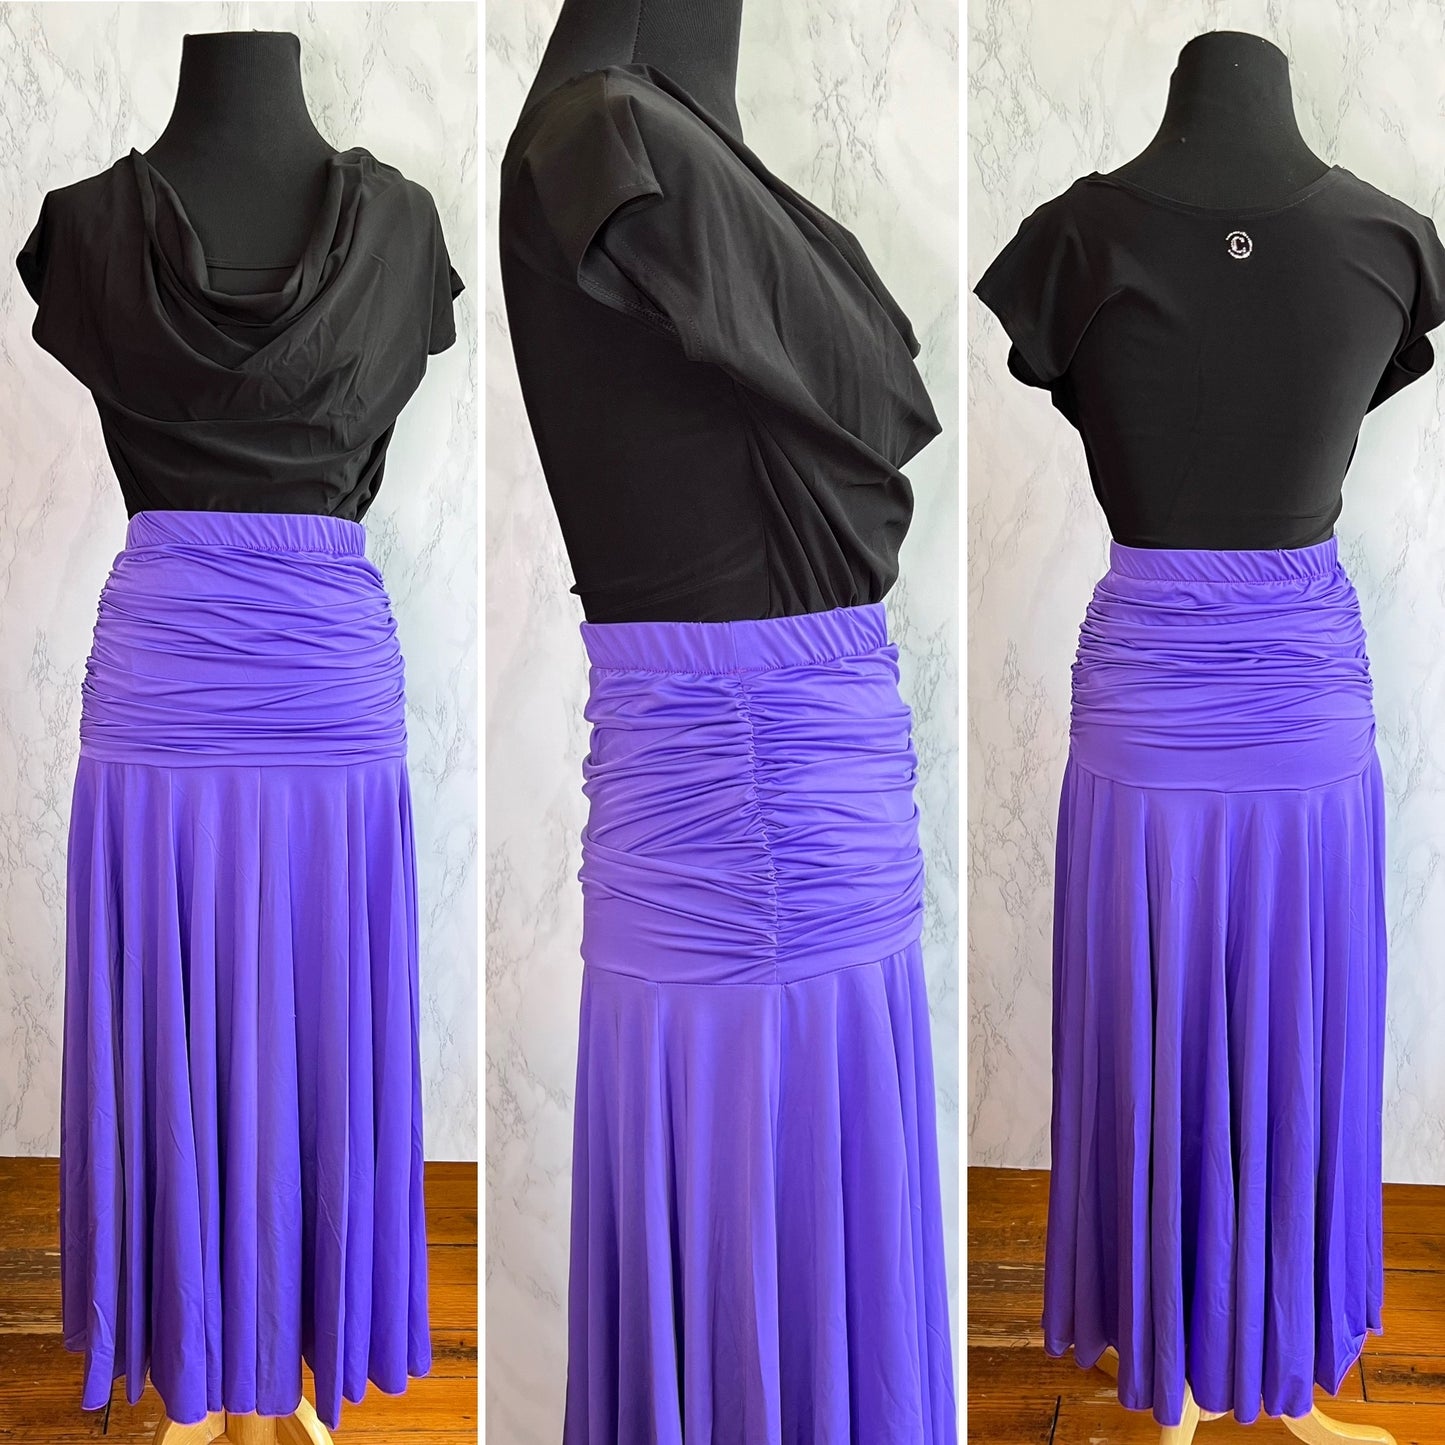 Long Black or Purple Ballroom Practice Skirt with Thick Gathered Waistband Sizes M-3XL PRA 281 in Stock